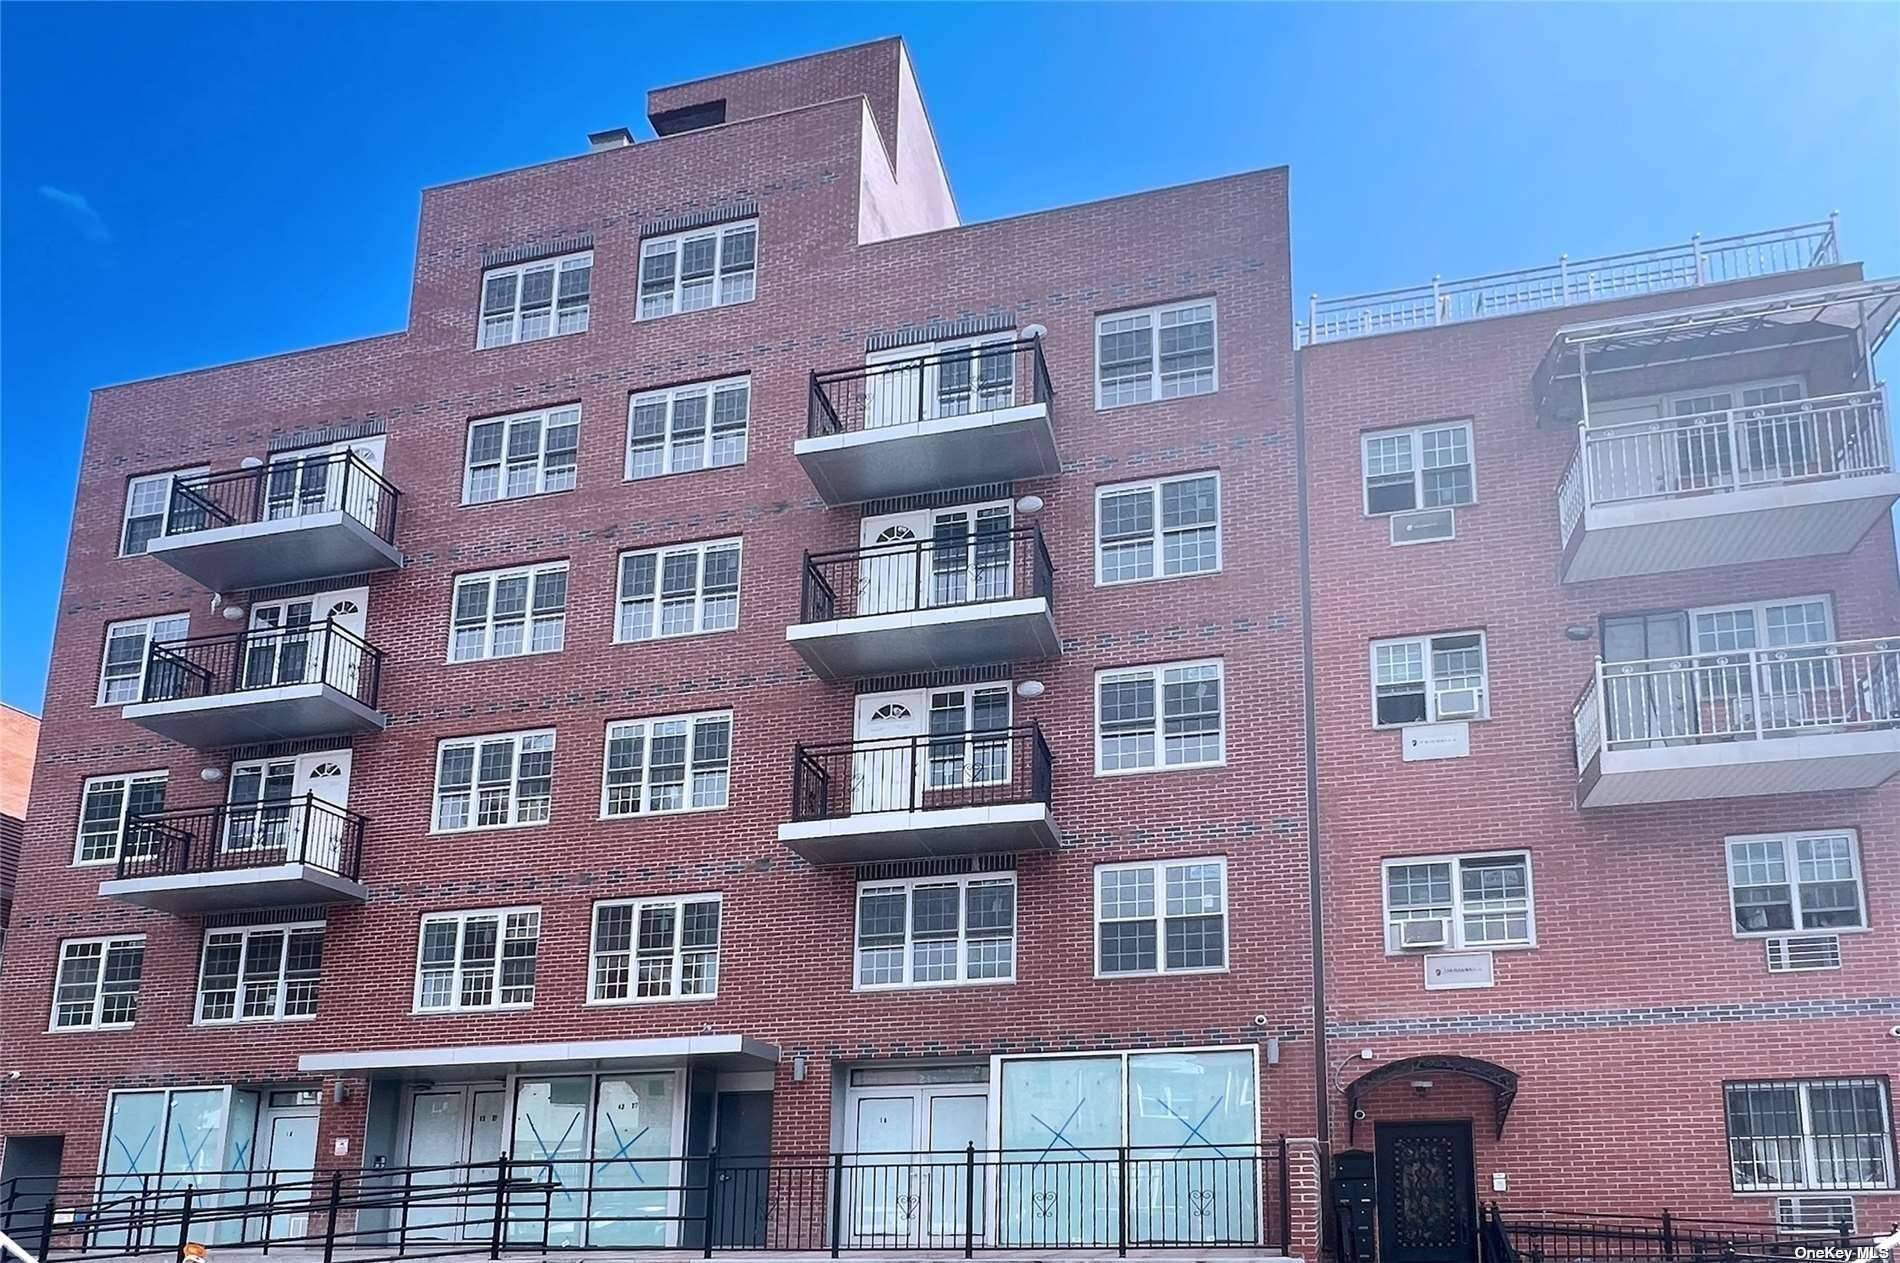 Location, Location, Location, Downtown Flushing, close to all, 10 mins walk to Main St 7 train.